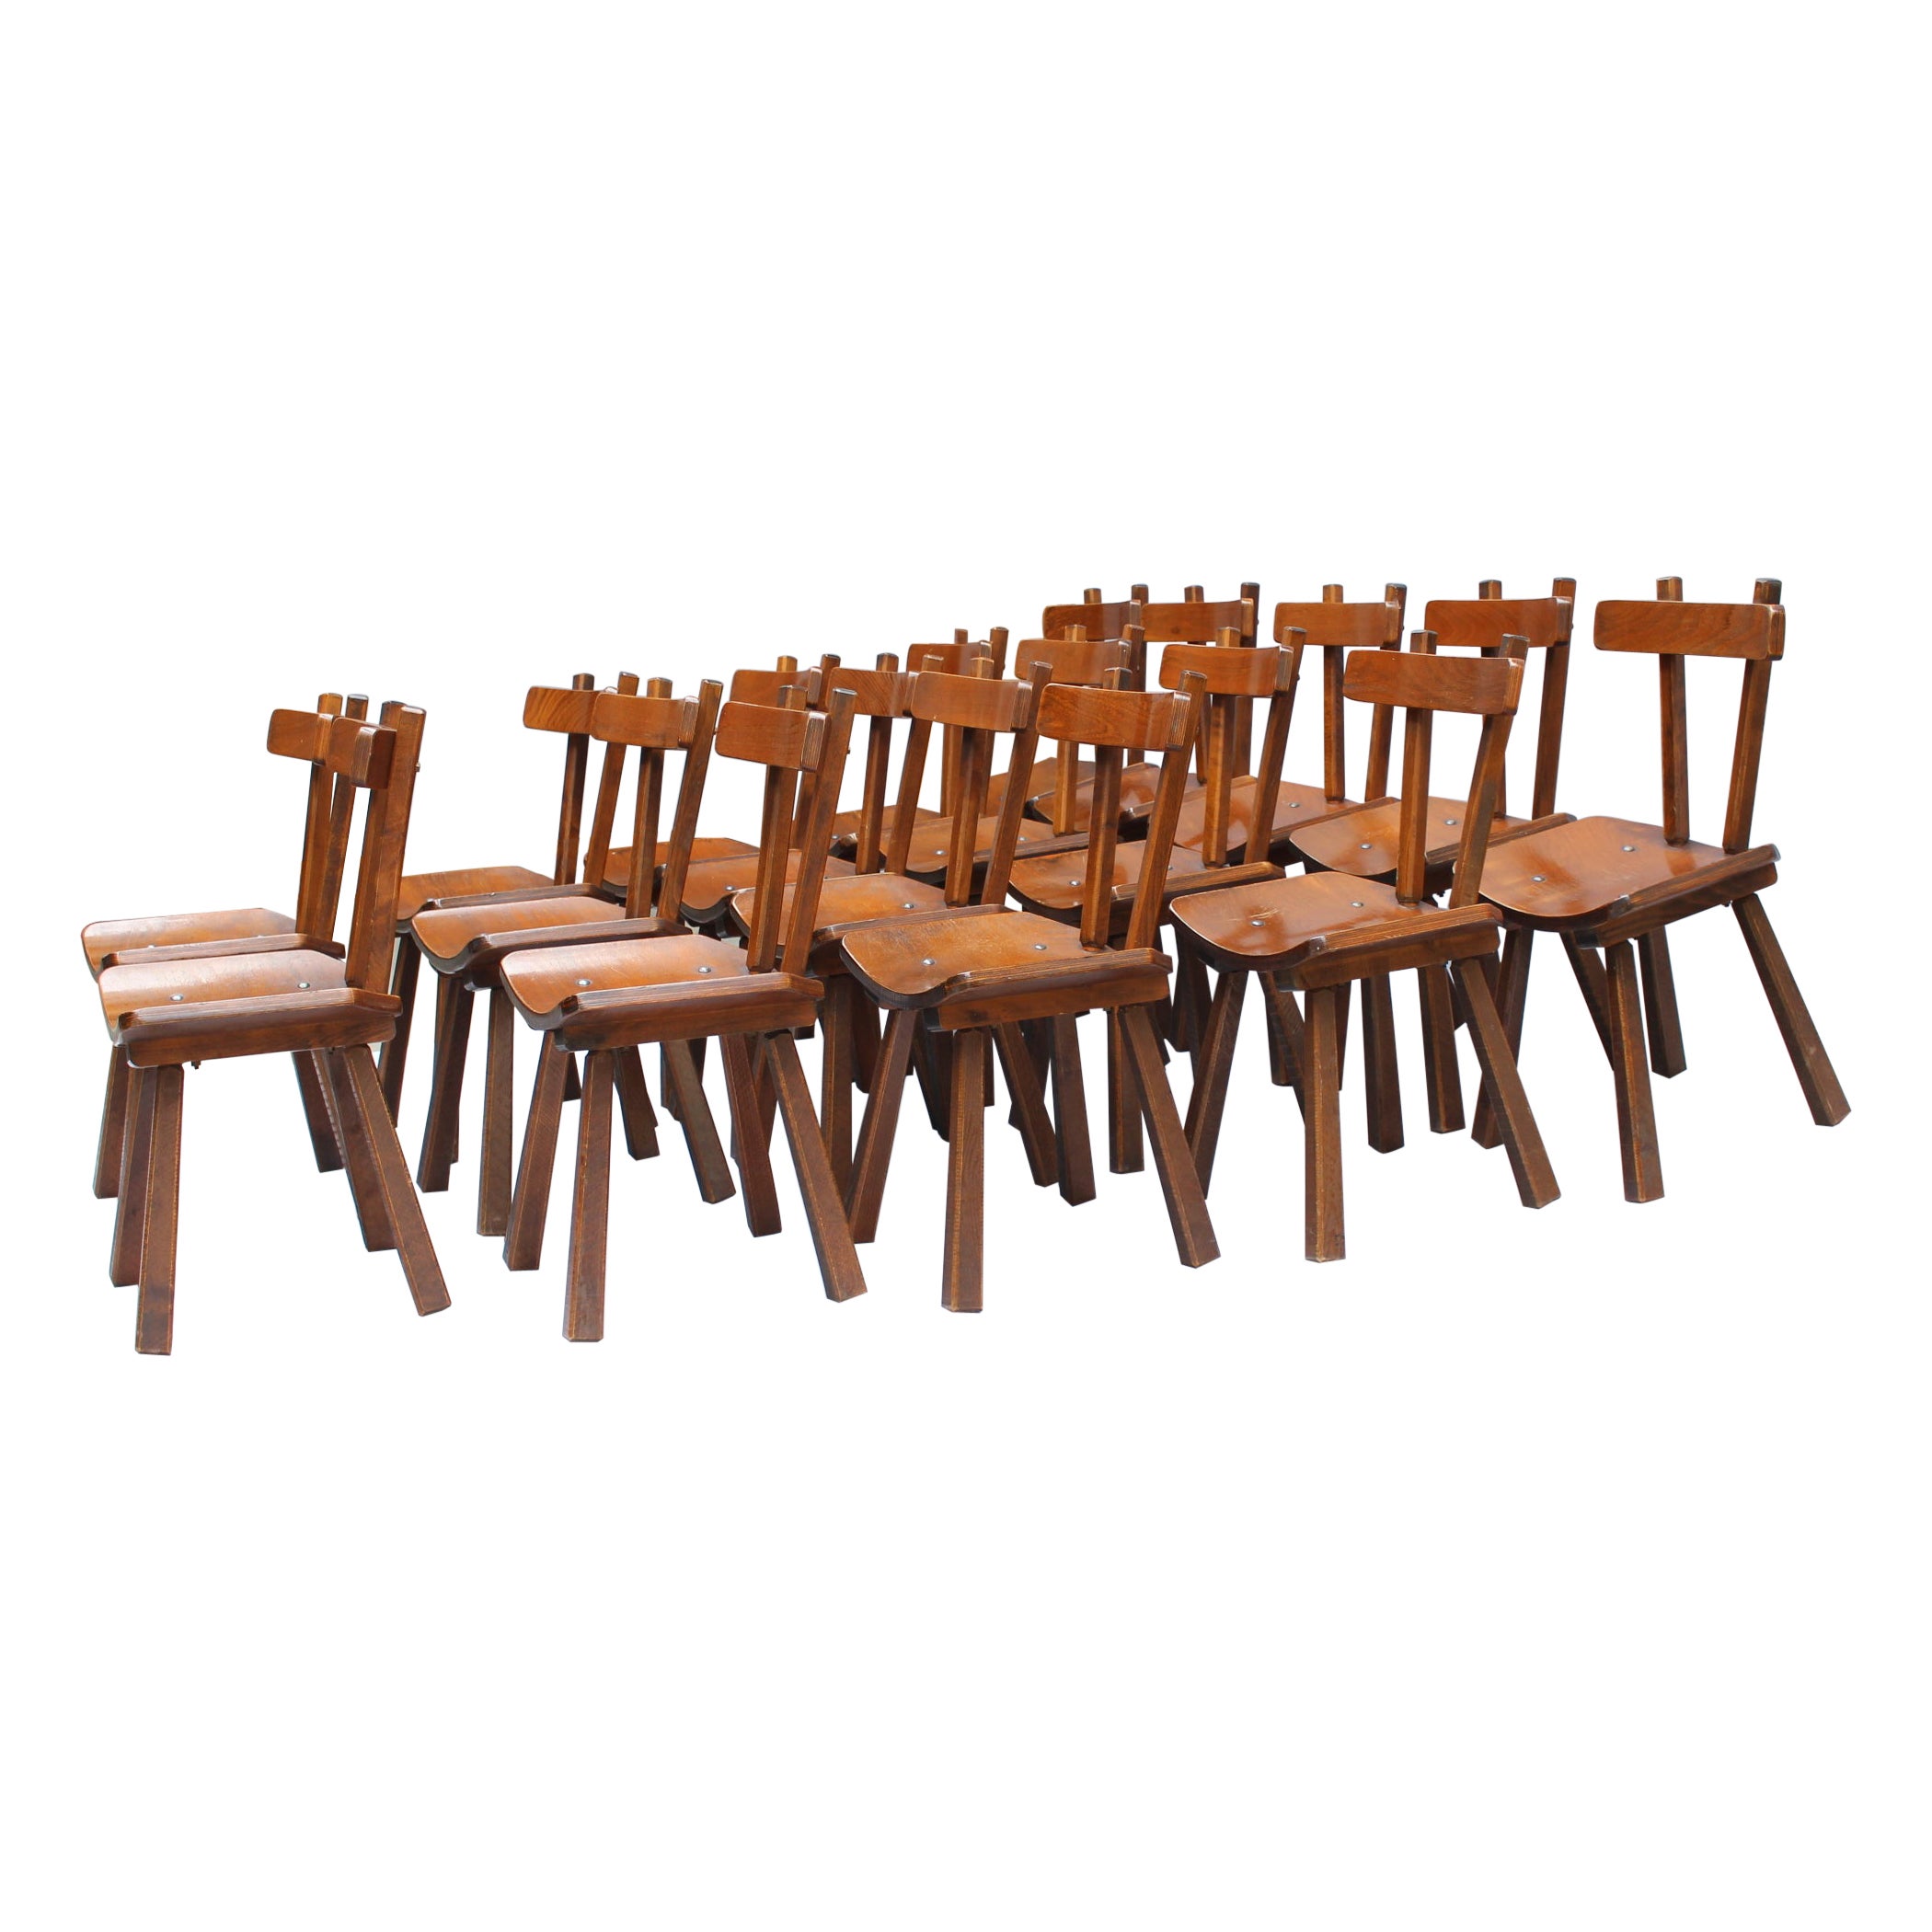 Eleven French mid-century solid and laminated wood chairs with metal details.

Price is per chair.